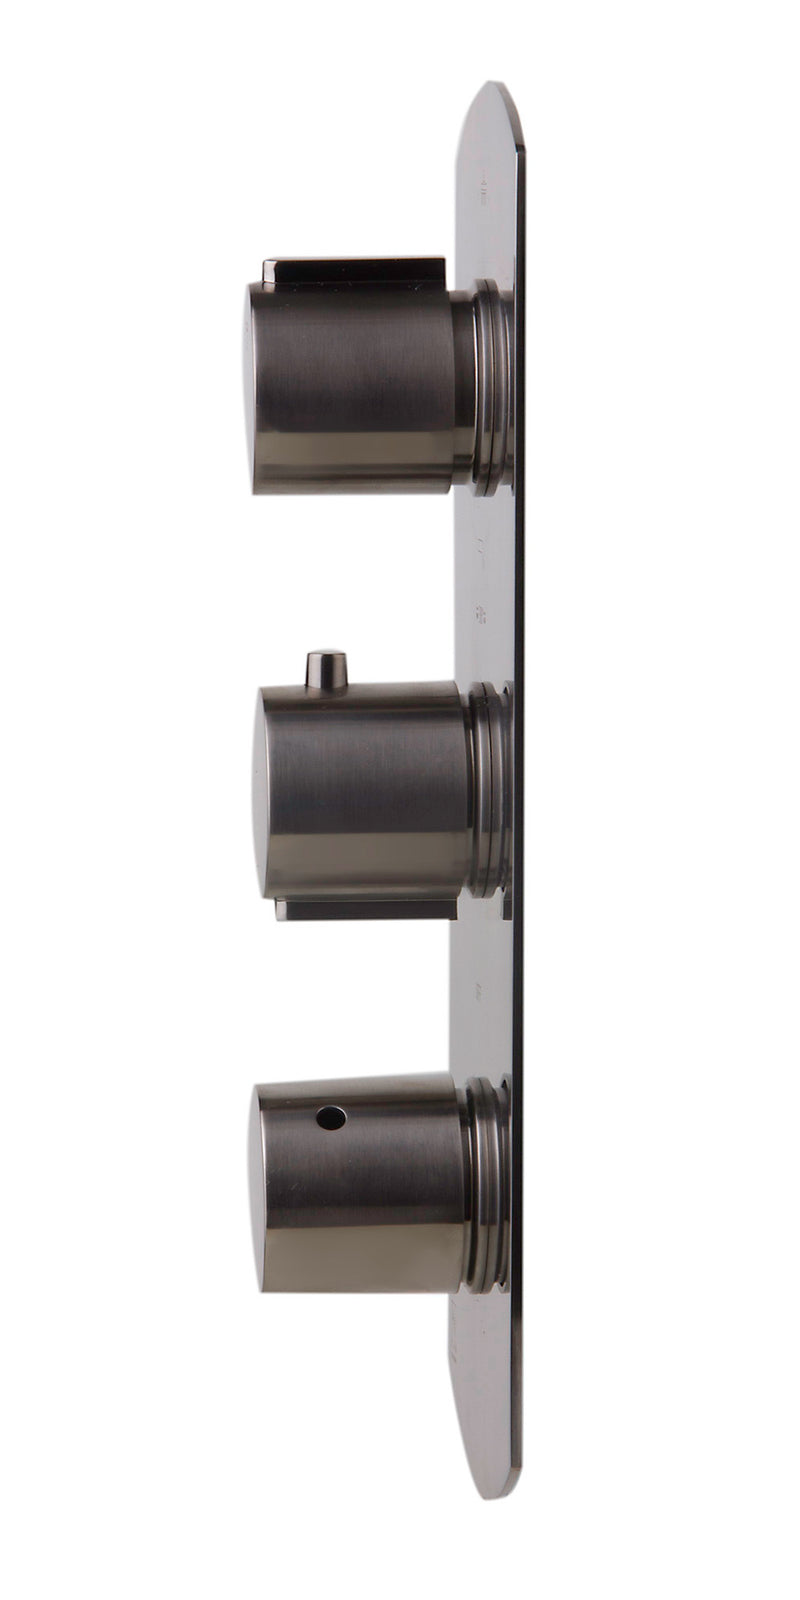 ALFI brand AB4101-BN Brushed Nickel Concealed 4-Way Thermostatic Valve Shower Mixer /w Round Knobs